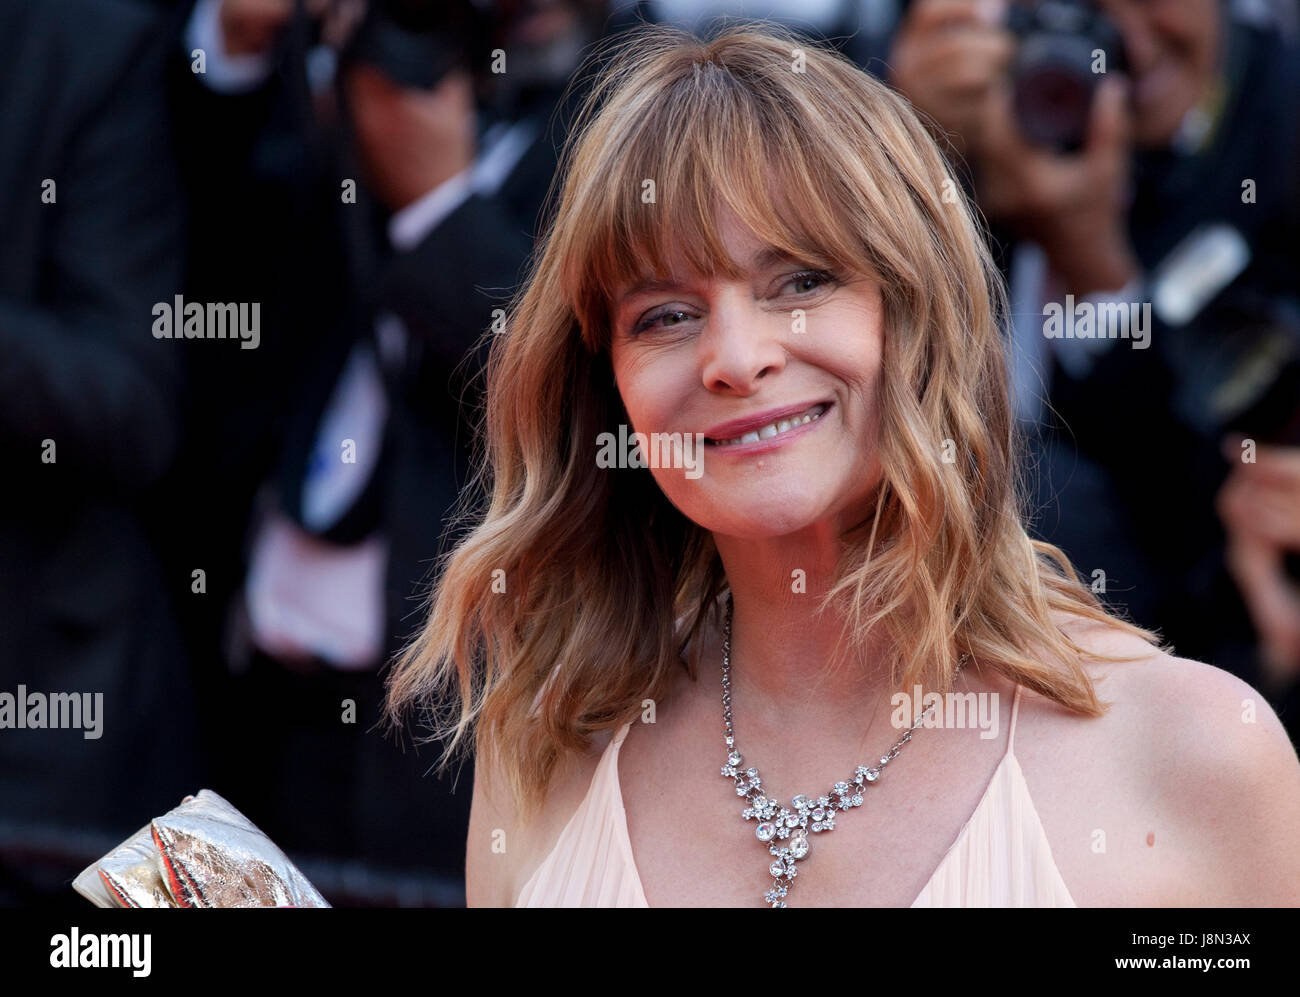 Cannes, France. 28th May, 2017. Actress Nastassja Kinski arriving to the Closing Ceremony and awards at the 70th Cannes Film Festival Sunday 28th May 2017, Cannes, France. Photo Credit: Doreen Kennedy/Alamy Live News Stock Photo